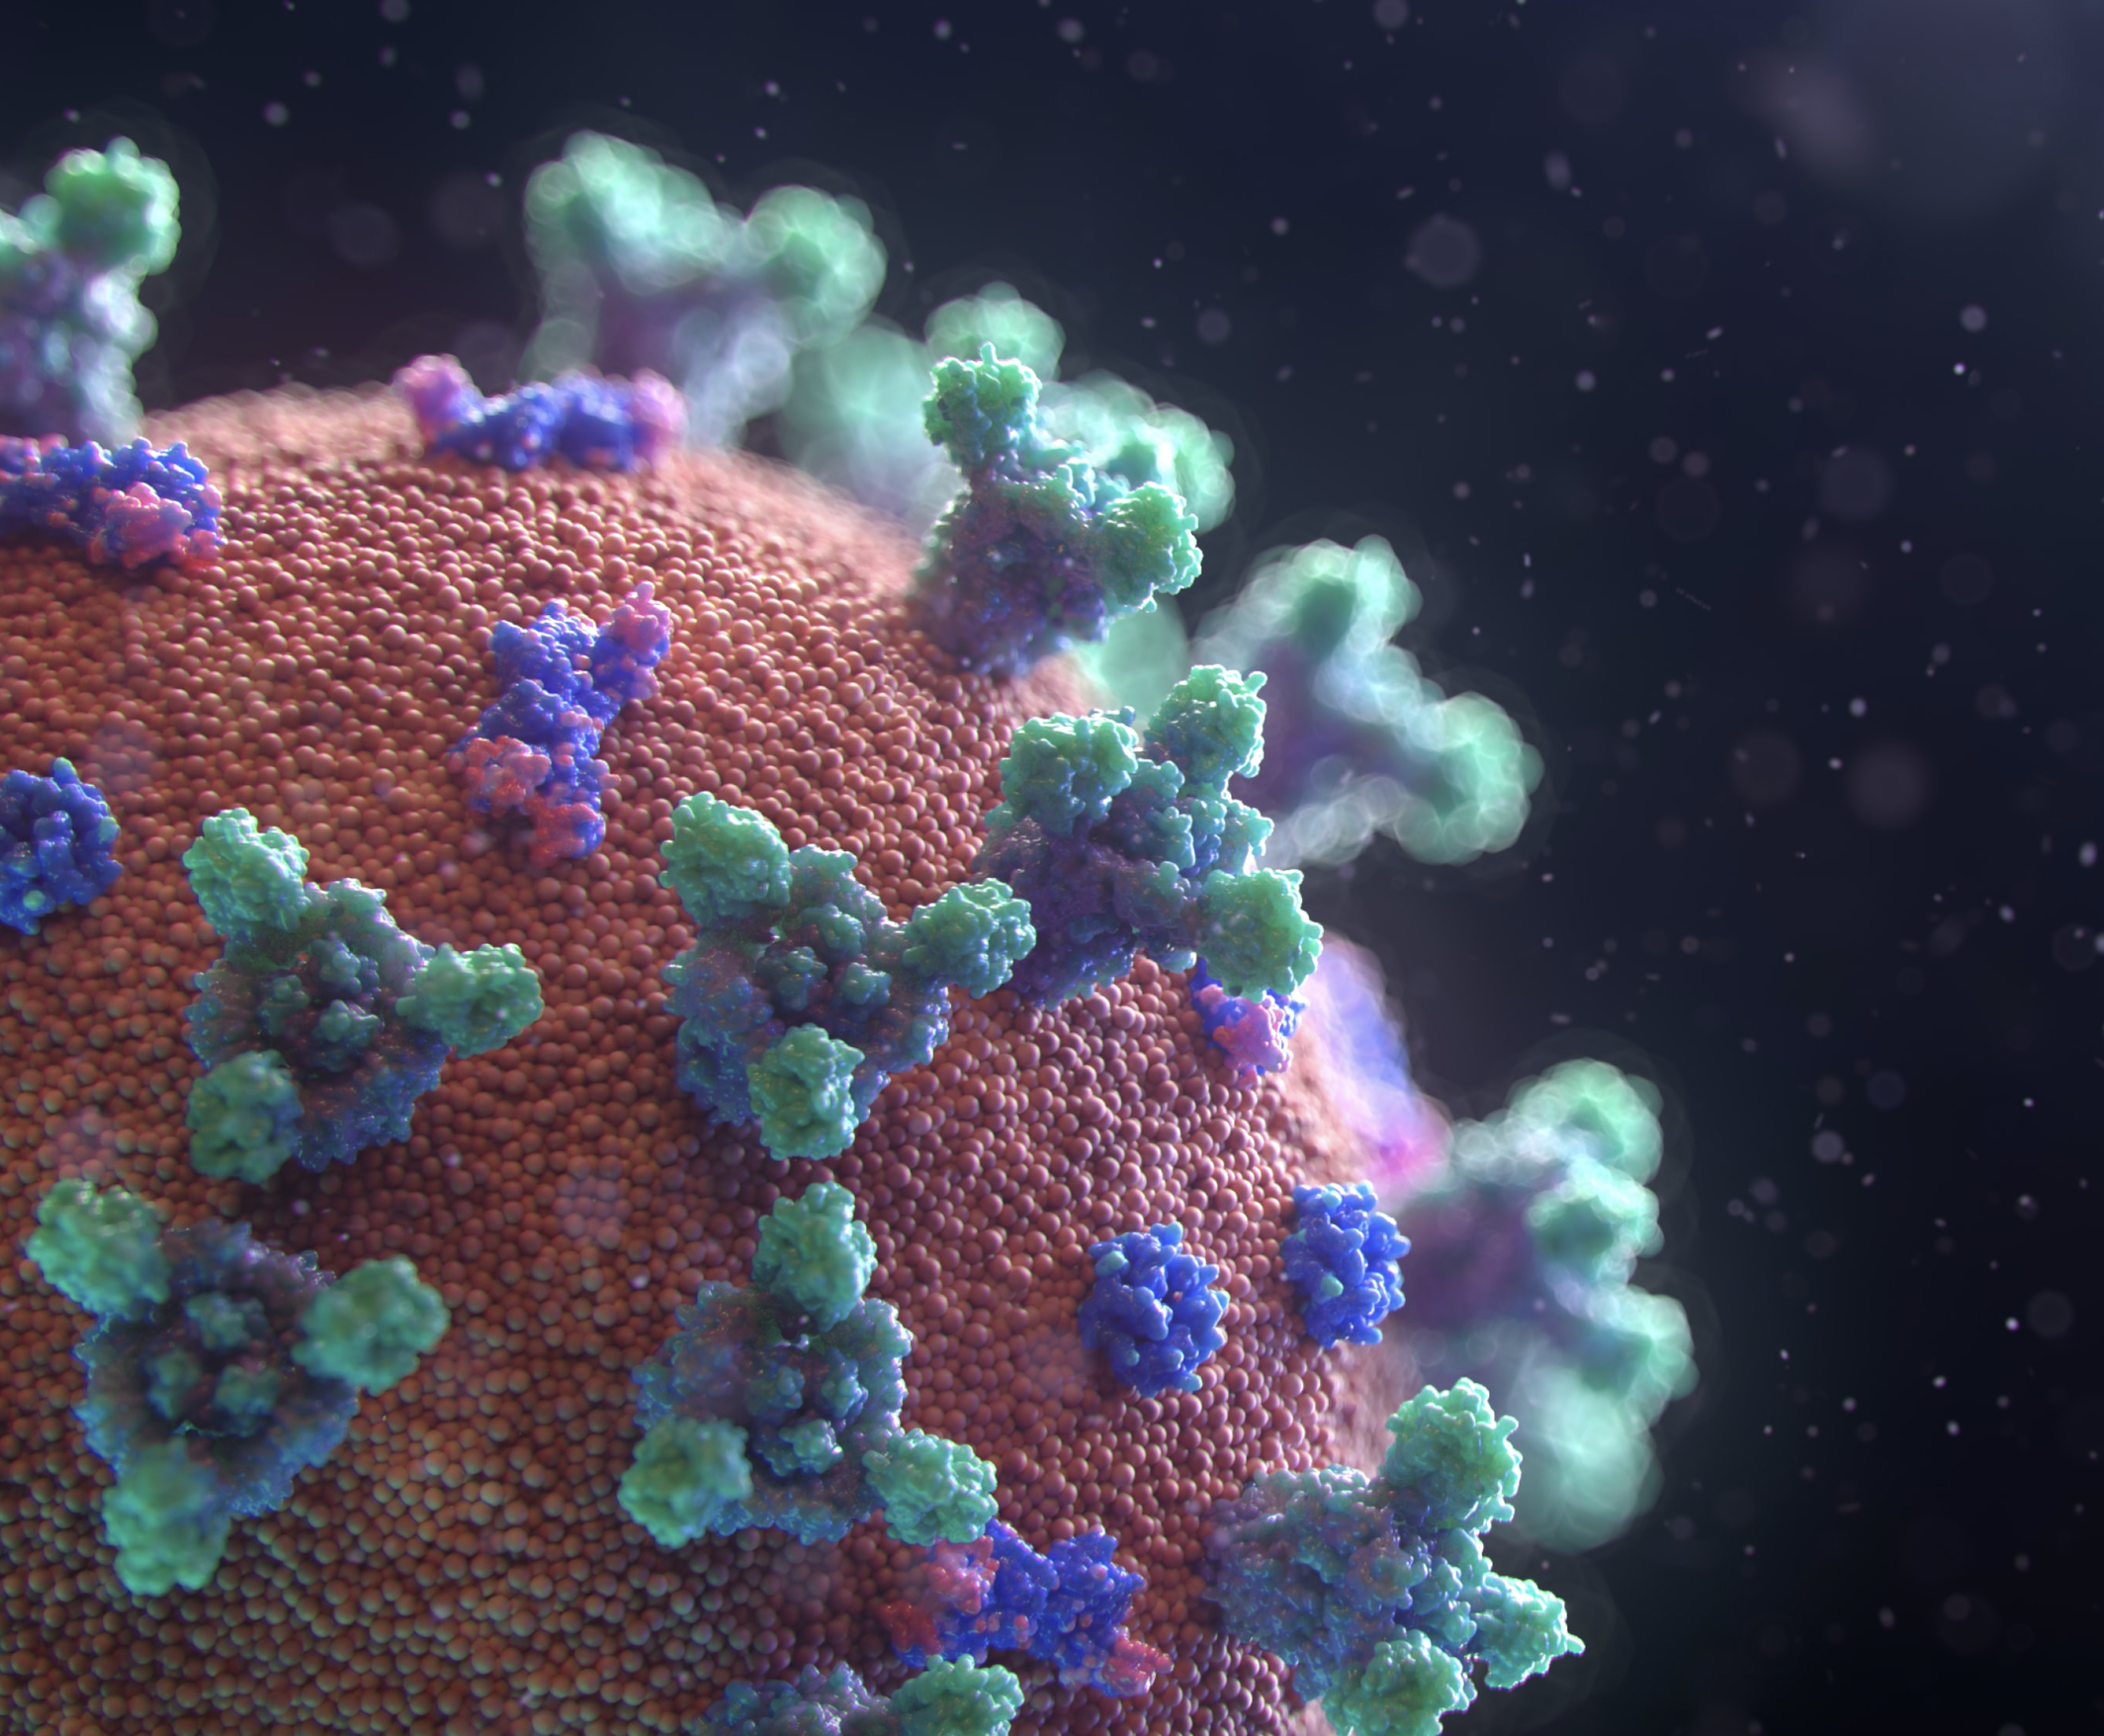 Medical image of the COVID-19 virus. The virus is red with green and blue tendrils against a navy blue background.